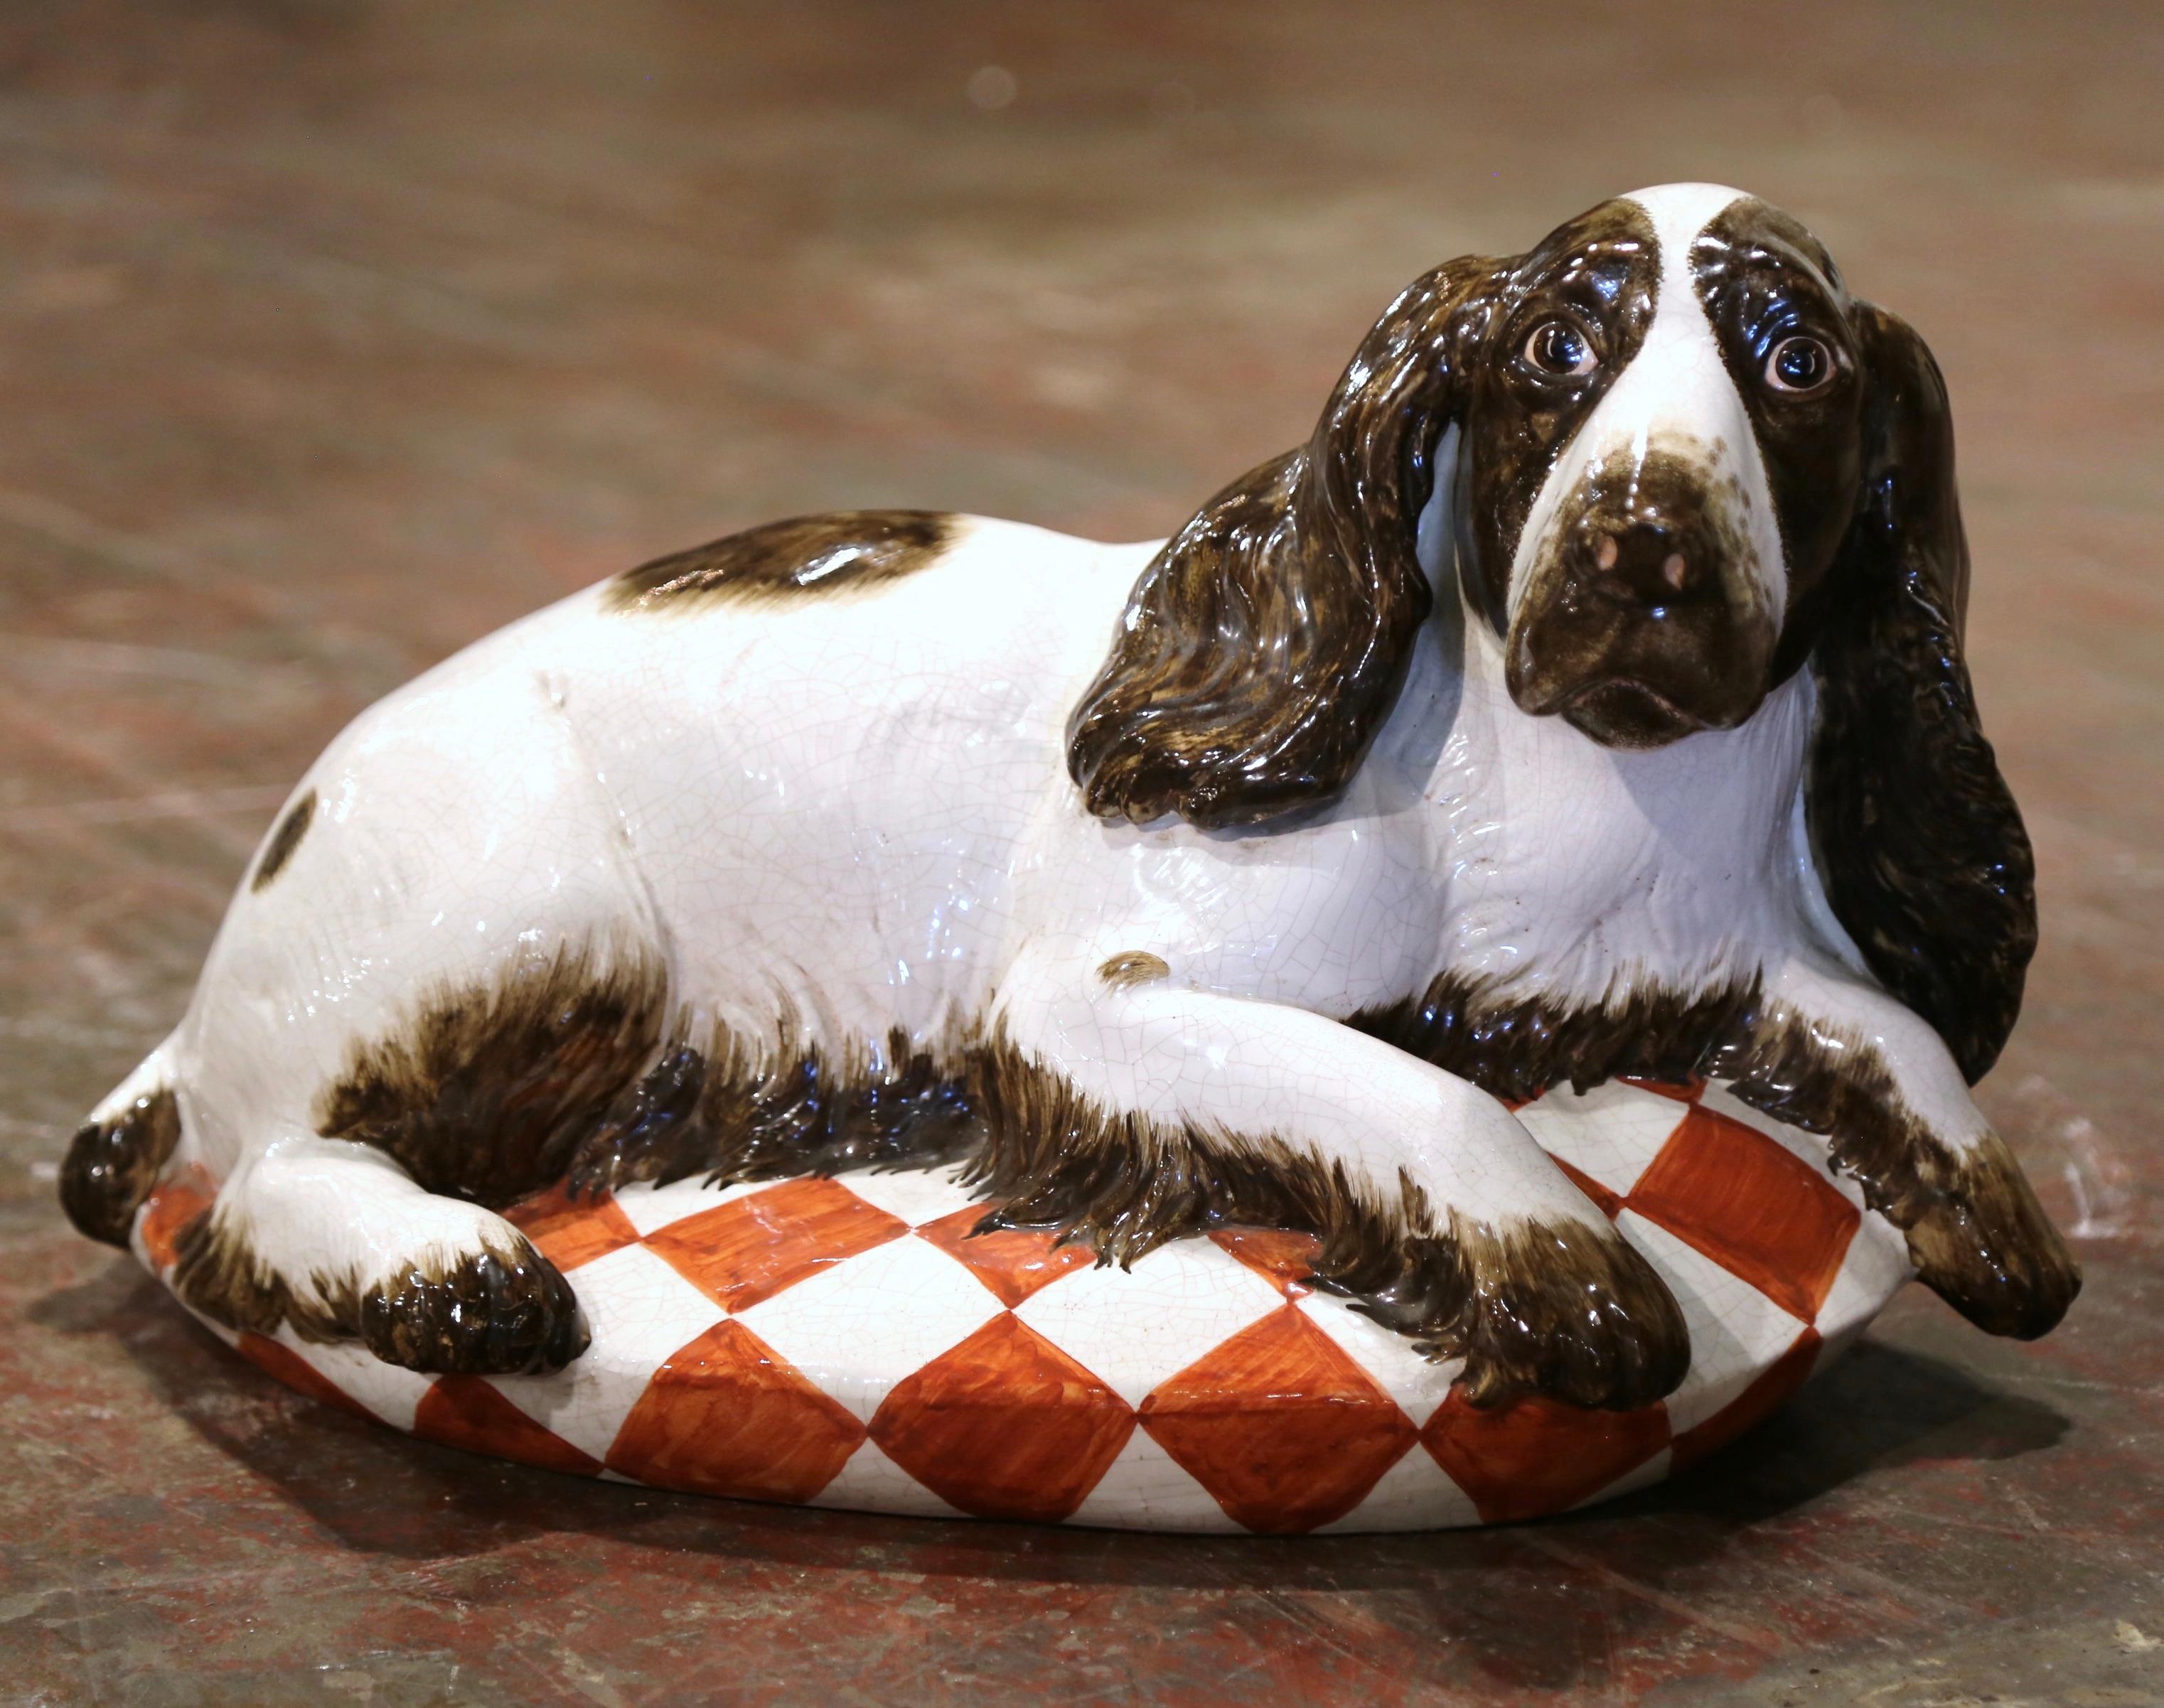 Dog lovers will appreciate this realistic vintage hound dog. Crafted in Italy, circa 2000, this charming terracotta statue is life-size, and depicts a sitting basset hound resting on a checker pillow. Boasting lovely russet, brown and white colors